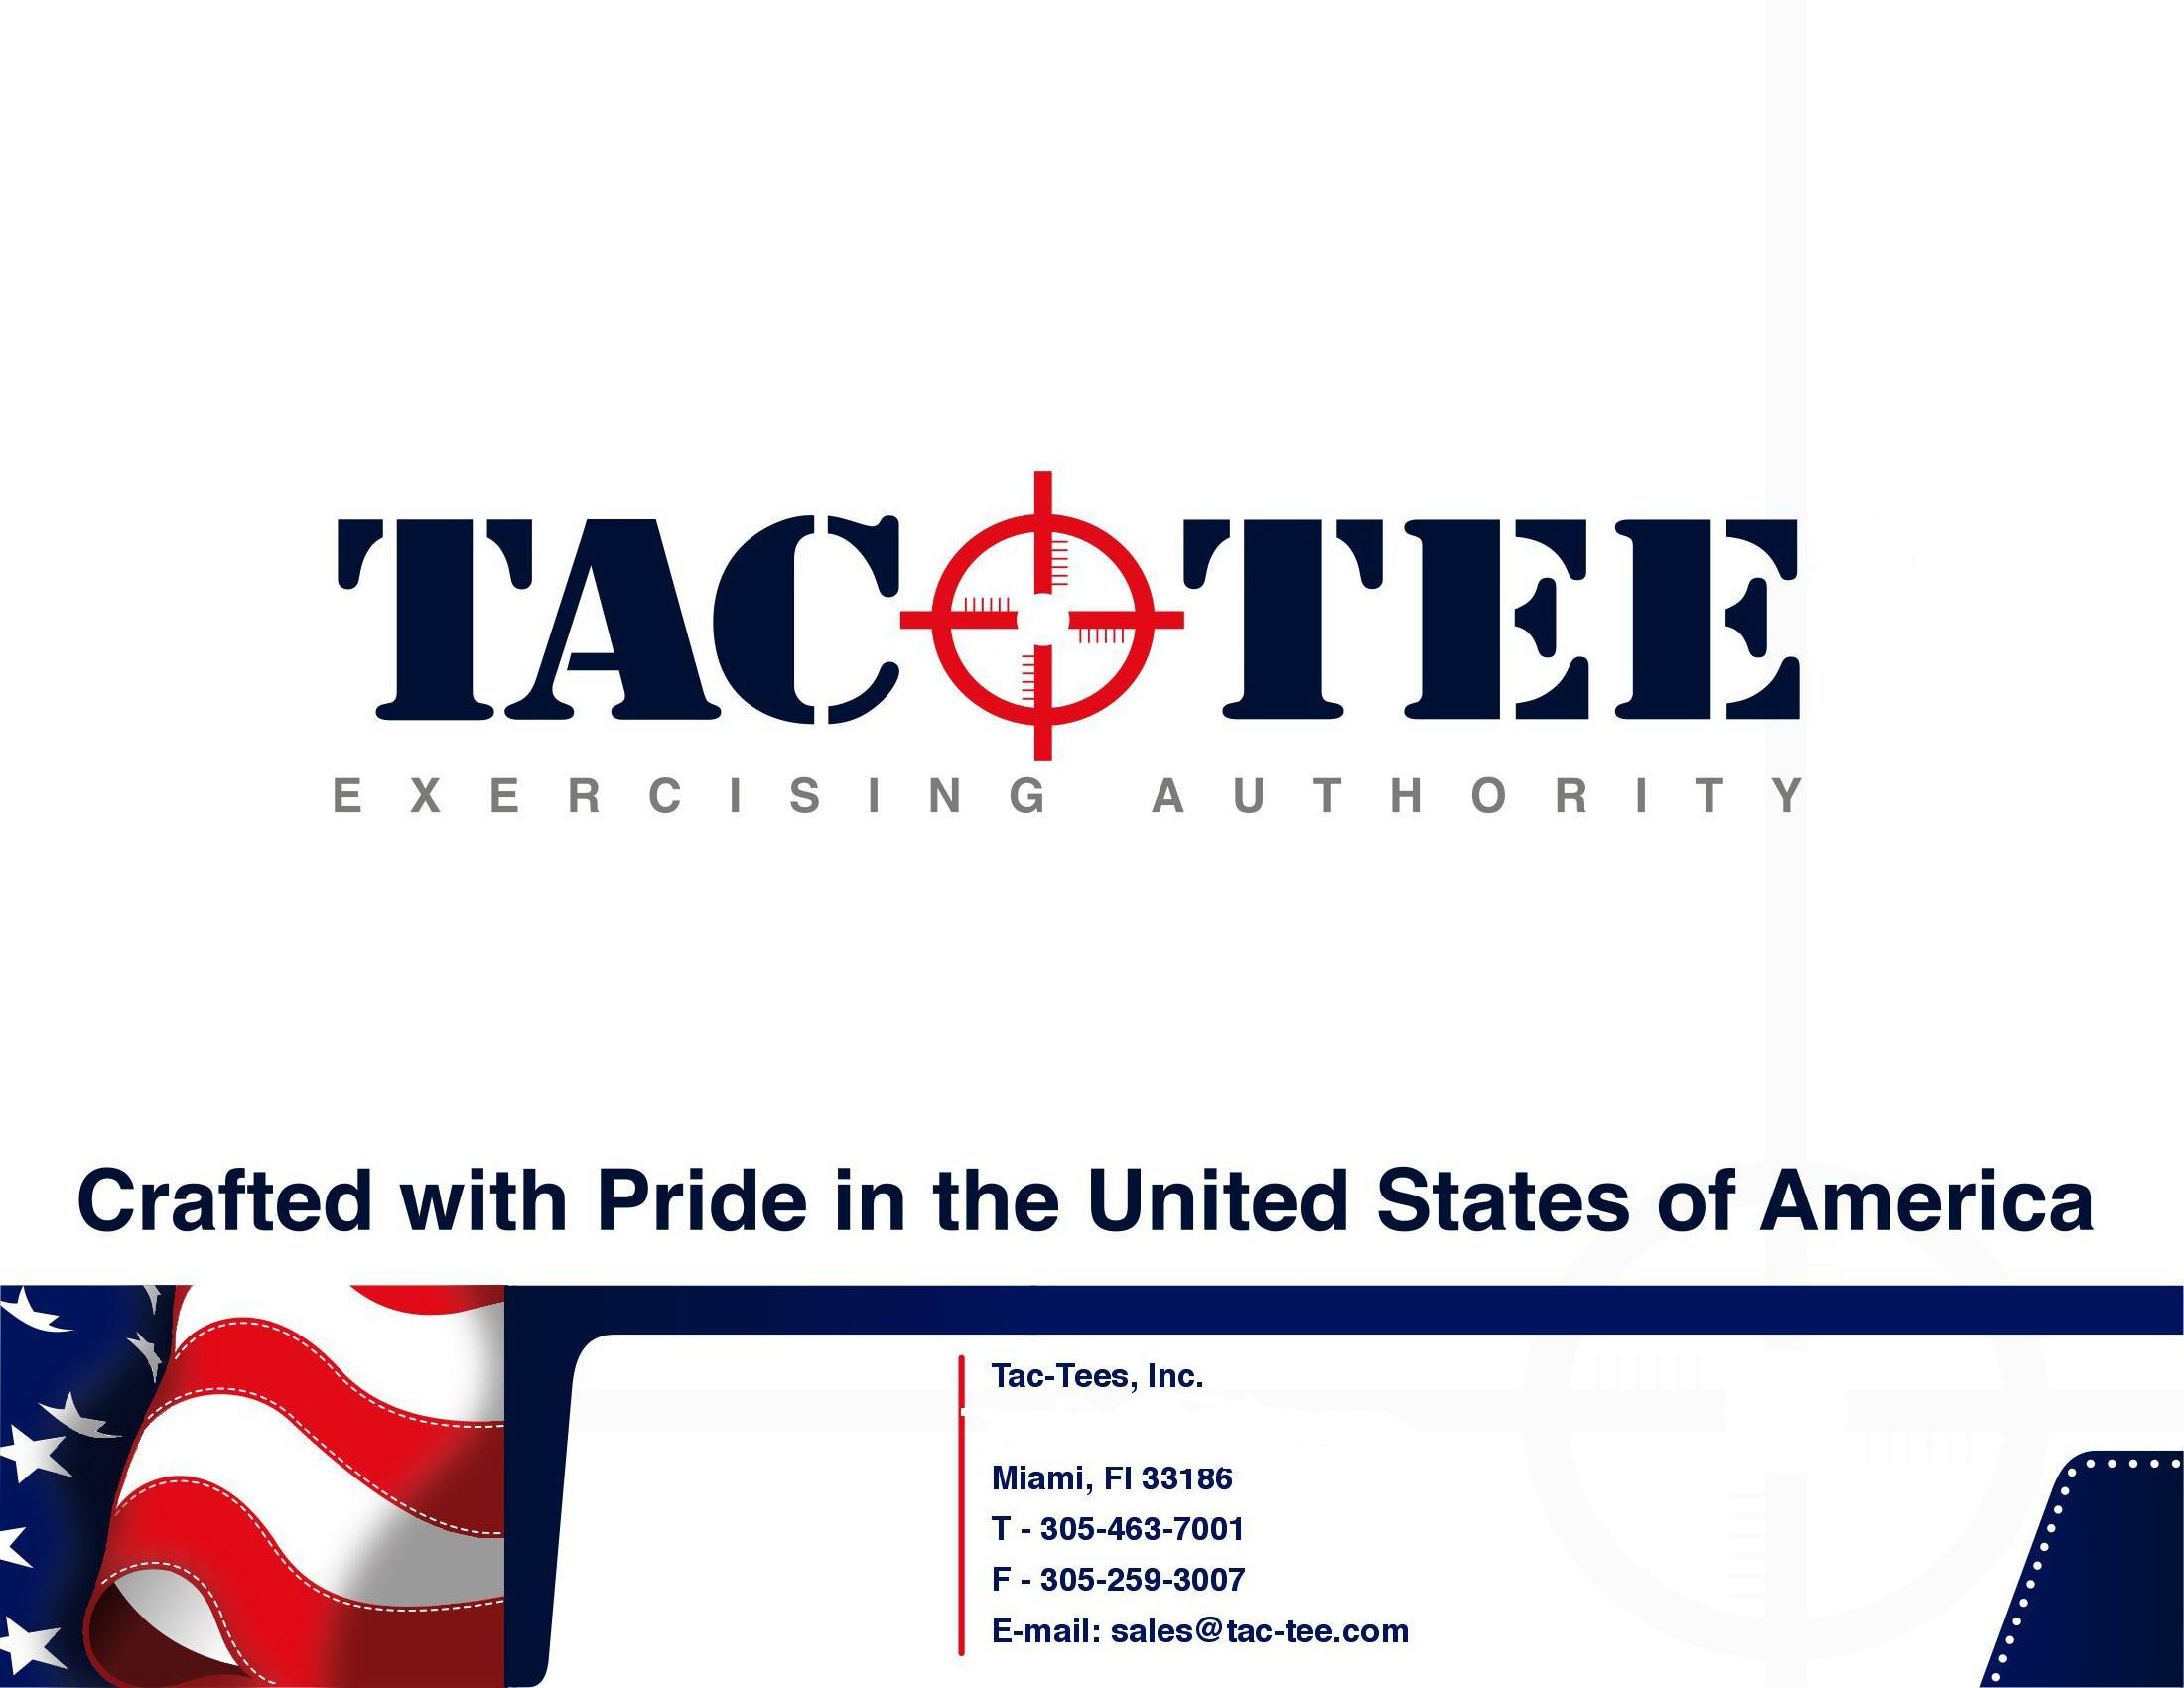  TAC TEE EXERCISING AUTHORITY CRAFTED WITH PRIDE IN THE UNITED STATES OF AMERICA